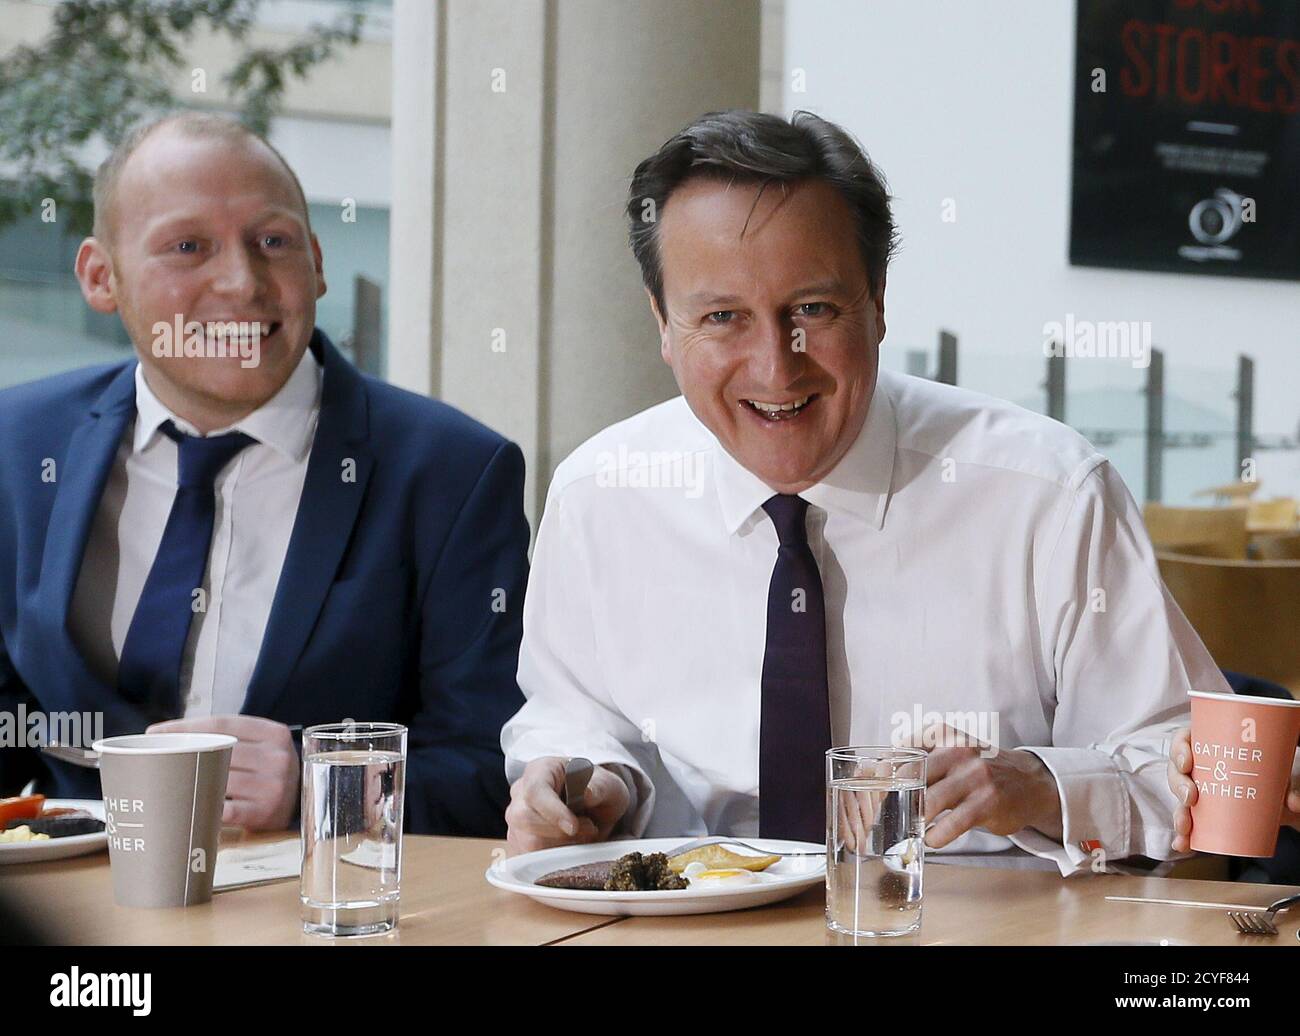 Britain's Prime Minister David Cameron eats breakfast during a visit to financial firm Scottish Widows in Edinburgh, Scotland April 7, 2015. REUTERS/Kirsty Wigglesworth/Pool Stock Photo